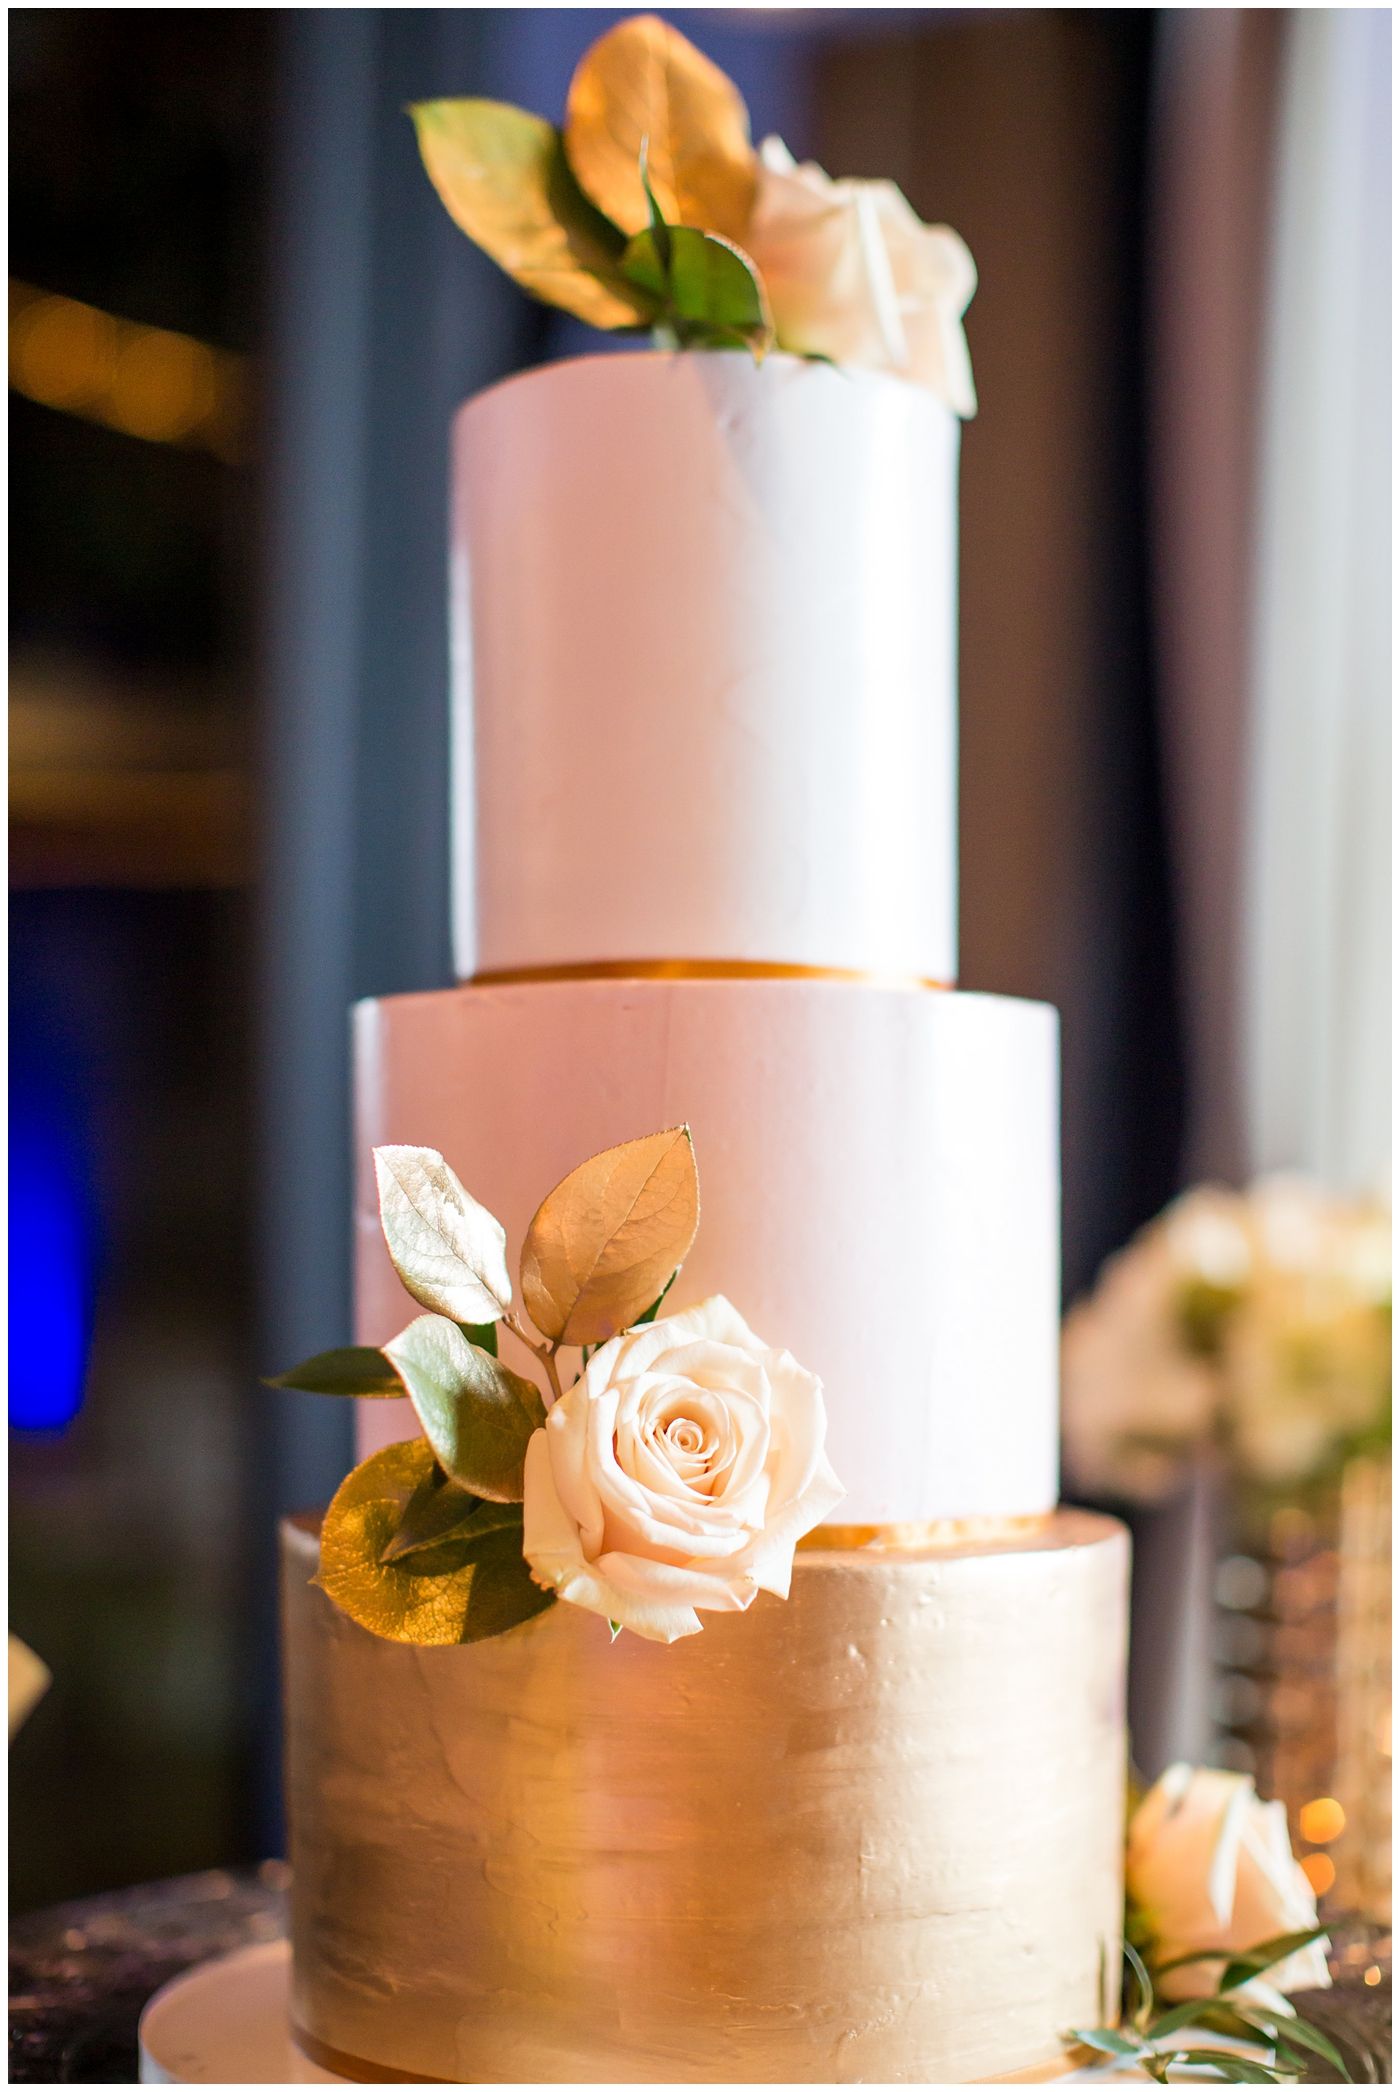 blush pink and gold three layer tier cake with white roses at wedding reception